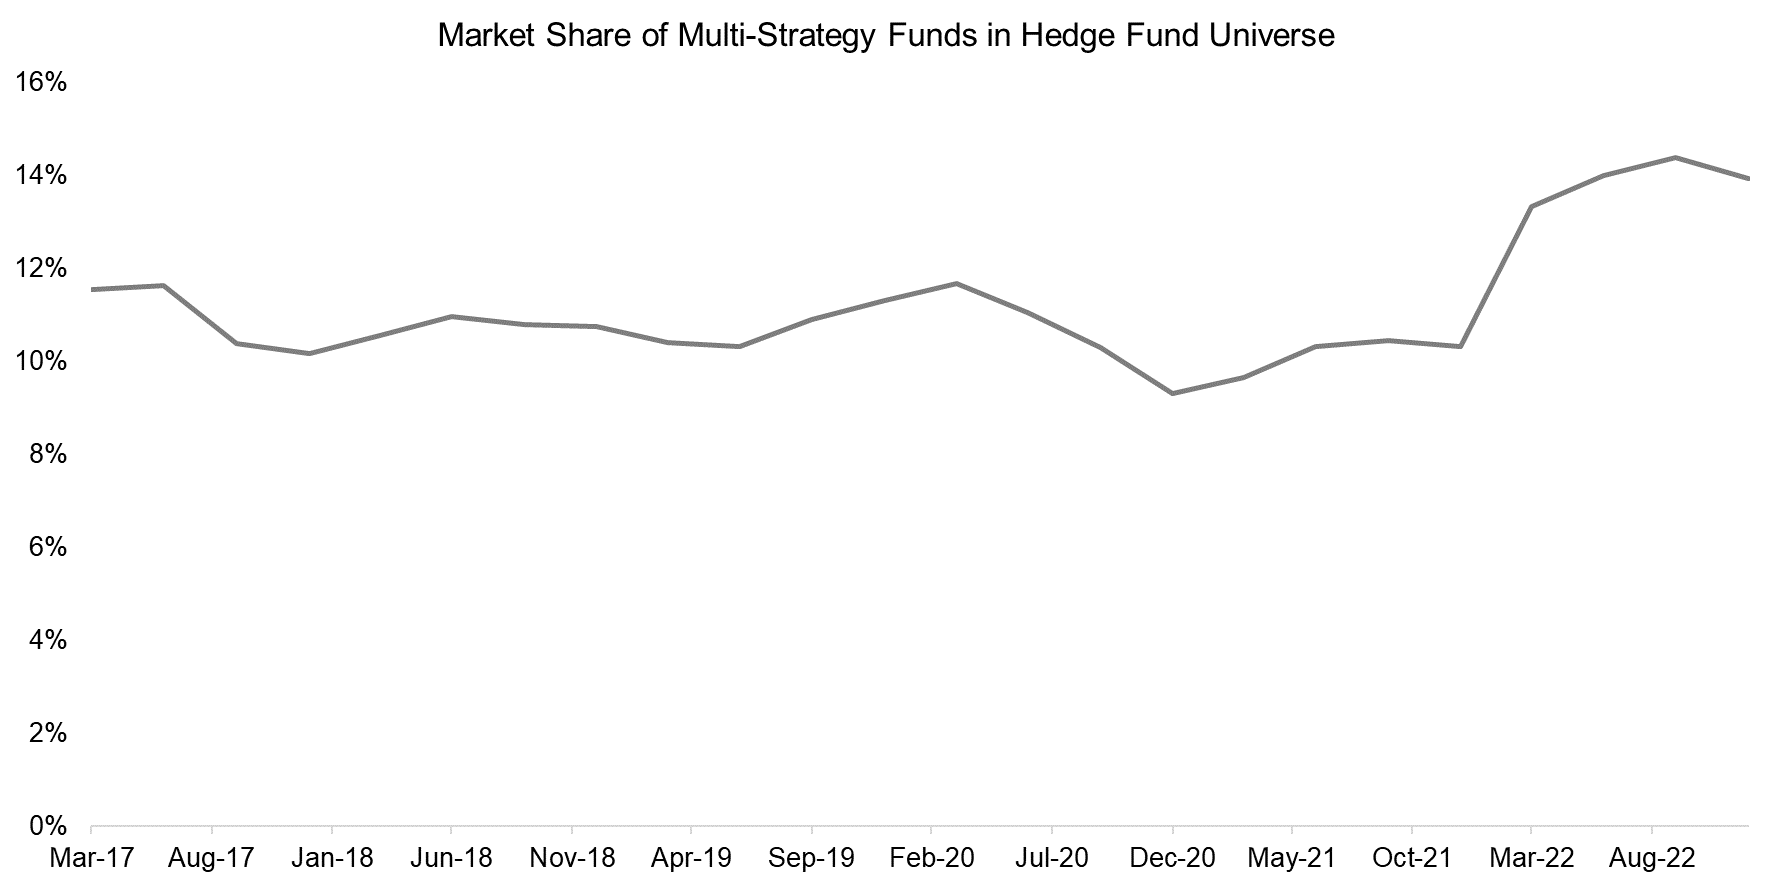 Market Share of Multi-Strategy Funds in Hedge Fund Universe